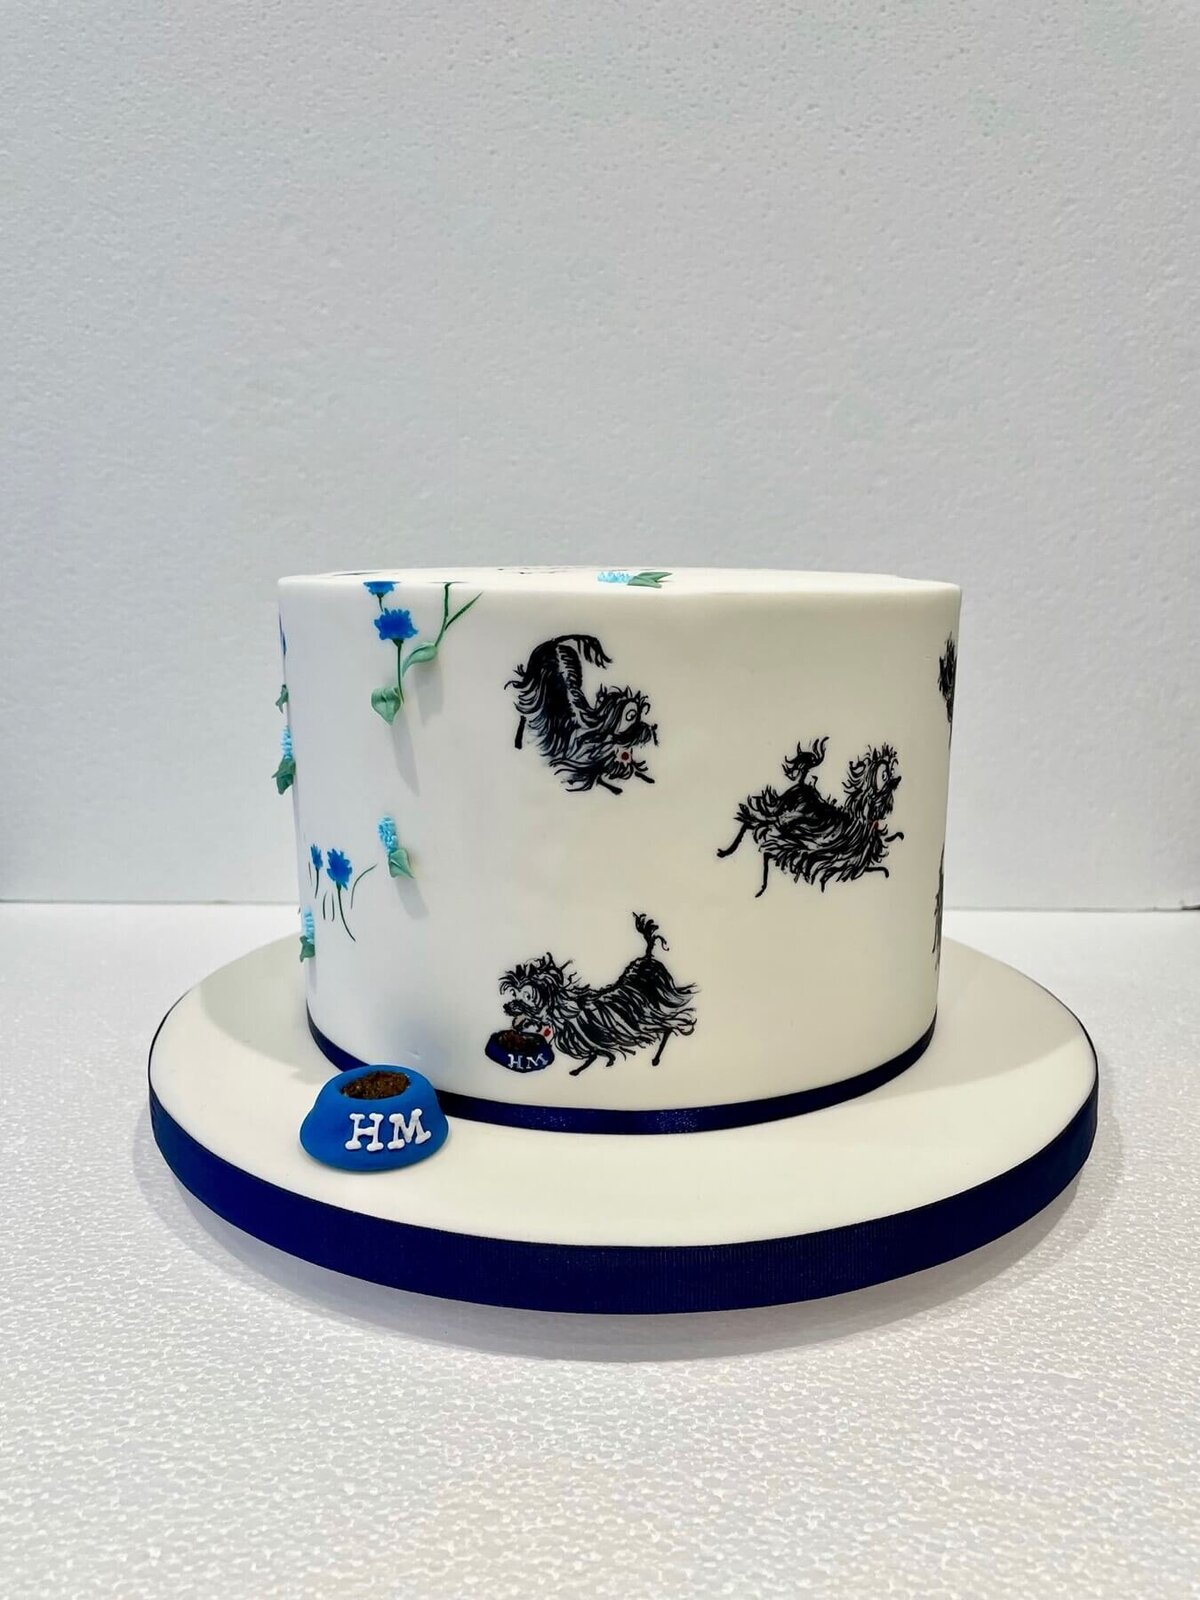 A birthday cake with hand painted dogs all over and a little model dog bowl